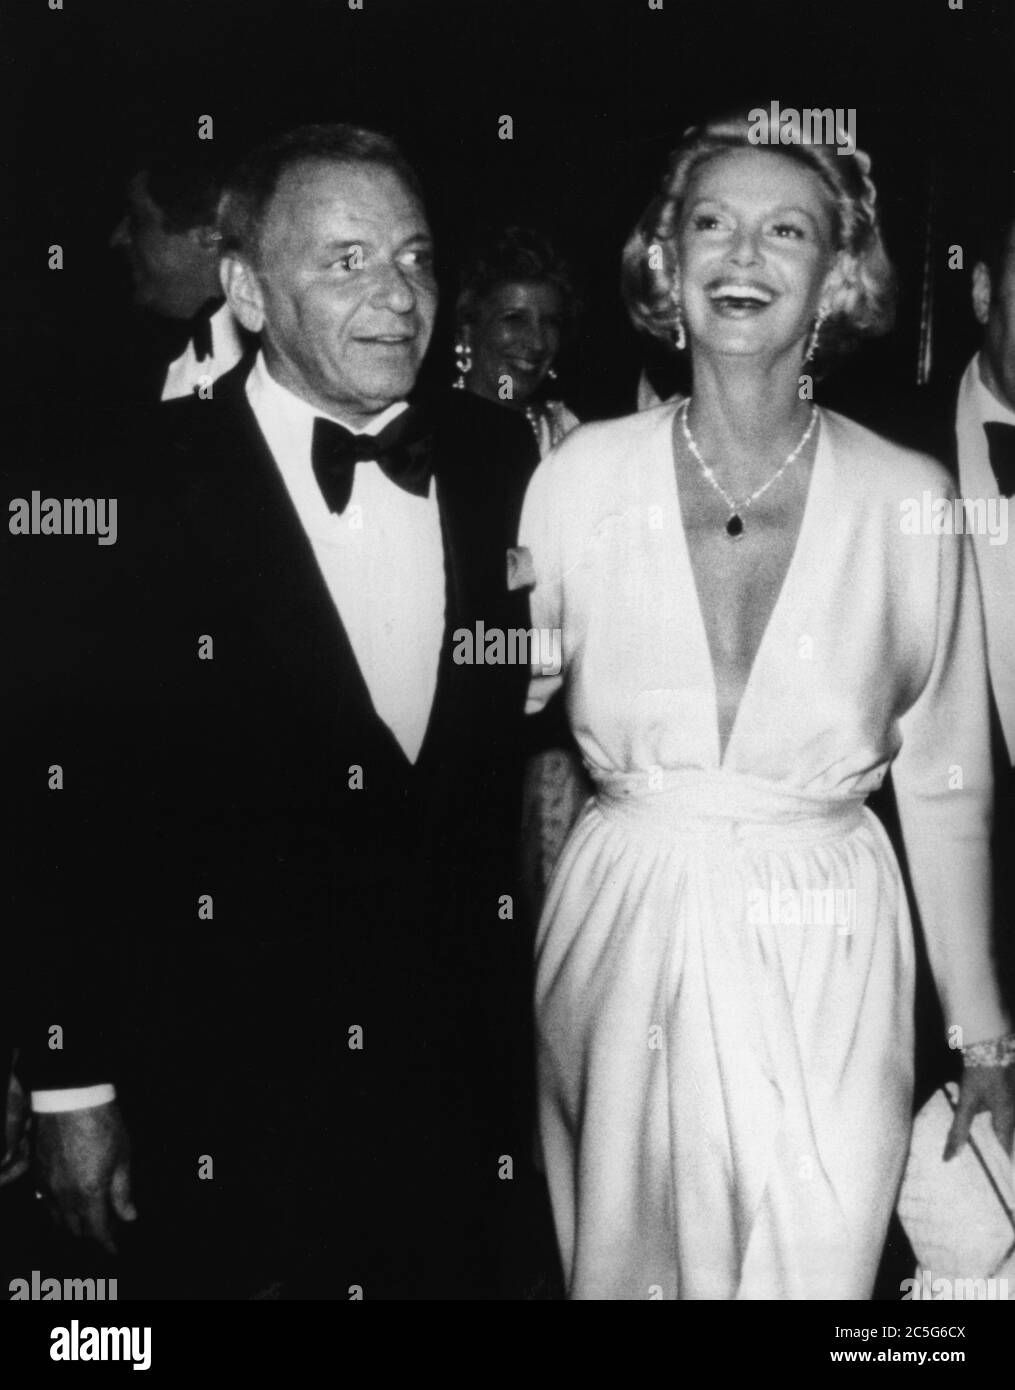 Apr 27, 1977 - New York, New York, USA - Singer FRANK SINATRA with wife BARBARA arrive at the Waldorf Astoria Hotel. The marquee of the Park Avenue hotel entrance will be covered with a banner proclaiming it ''Frank's Place,'' a real Italian trattoria where a gala party, hosted by Gov. Carey, will be held after the Frank Sinatra Robert Merrill concert at Carnegie Hall for the benefit of Lenox Hill Hospital and the Institute of Sport Medicine. This marks the second time the Waldorf's Park Avenue entrance has ever been closed for a special event.  (Credit Image: © Keystone Press Agency/Keystone Stock Photo